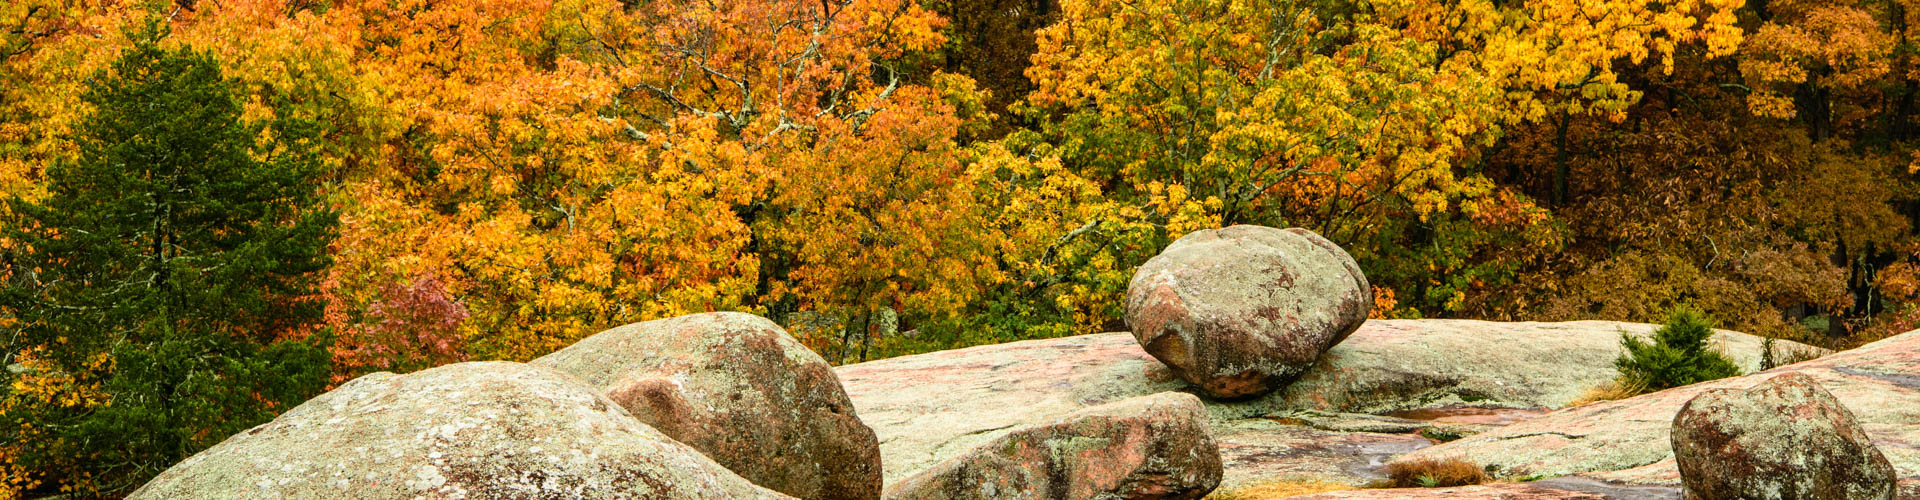 The elephant-shaped boulders at Elephant Rocks State Park are accented by the various shades of orange and red leaves on the trees in the background